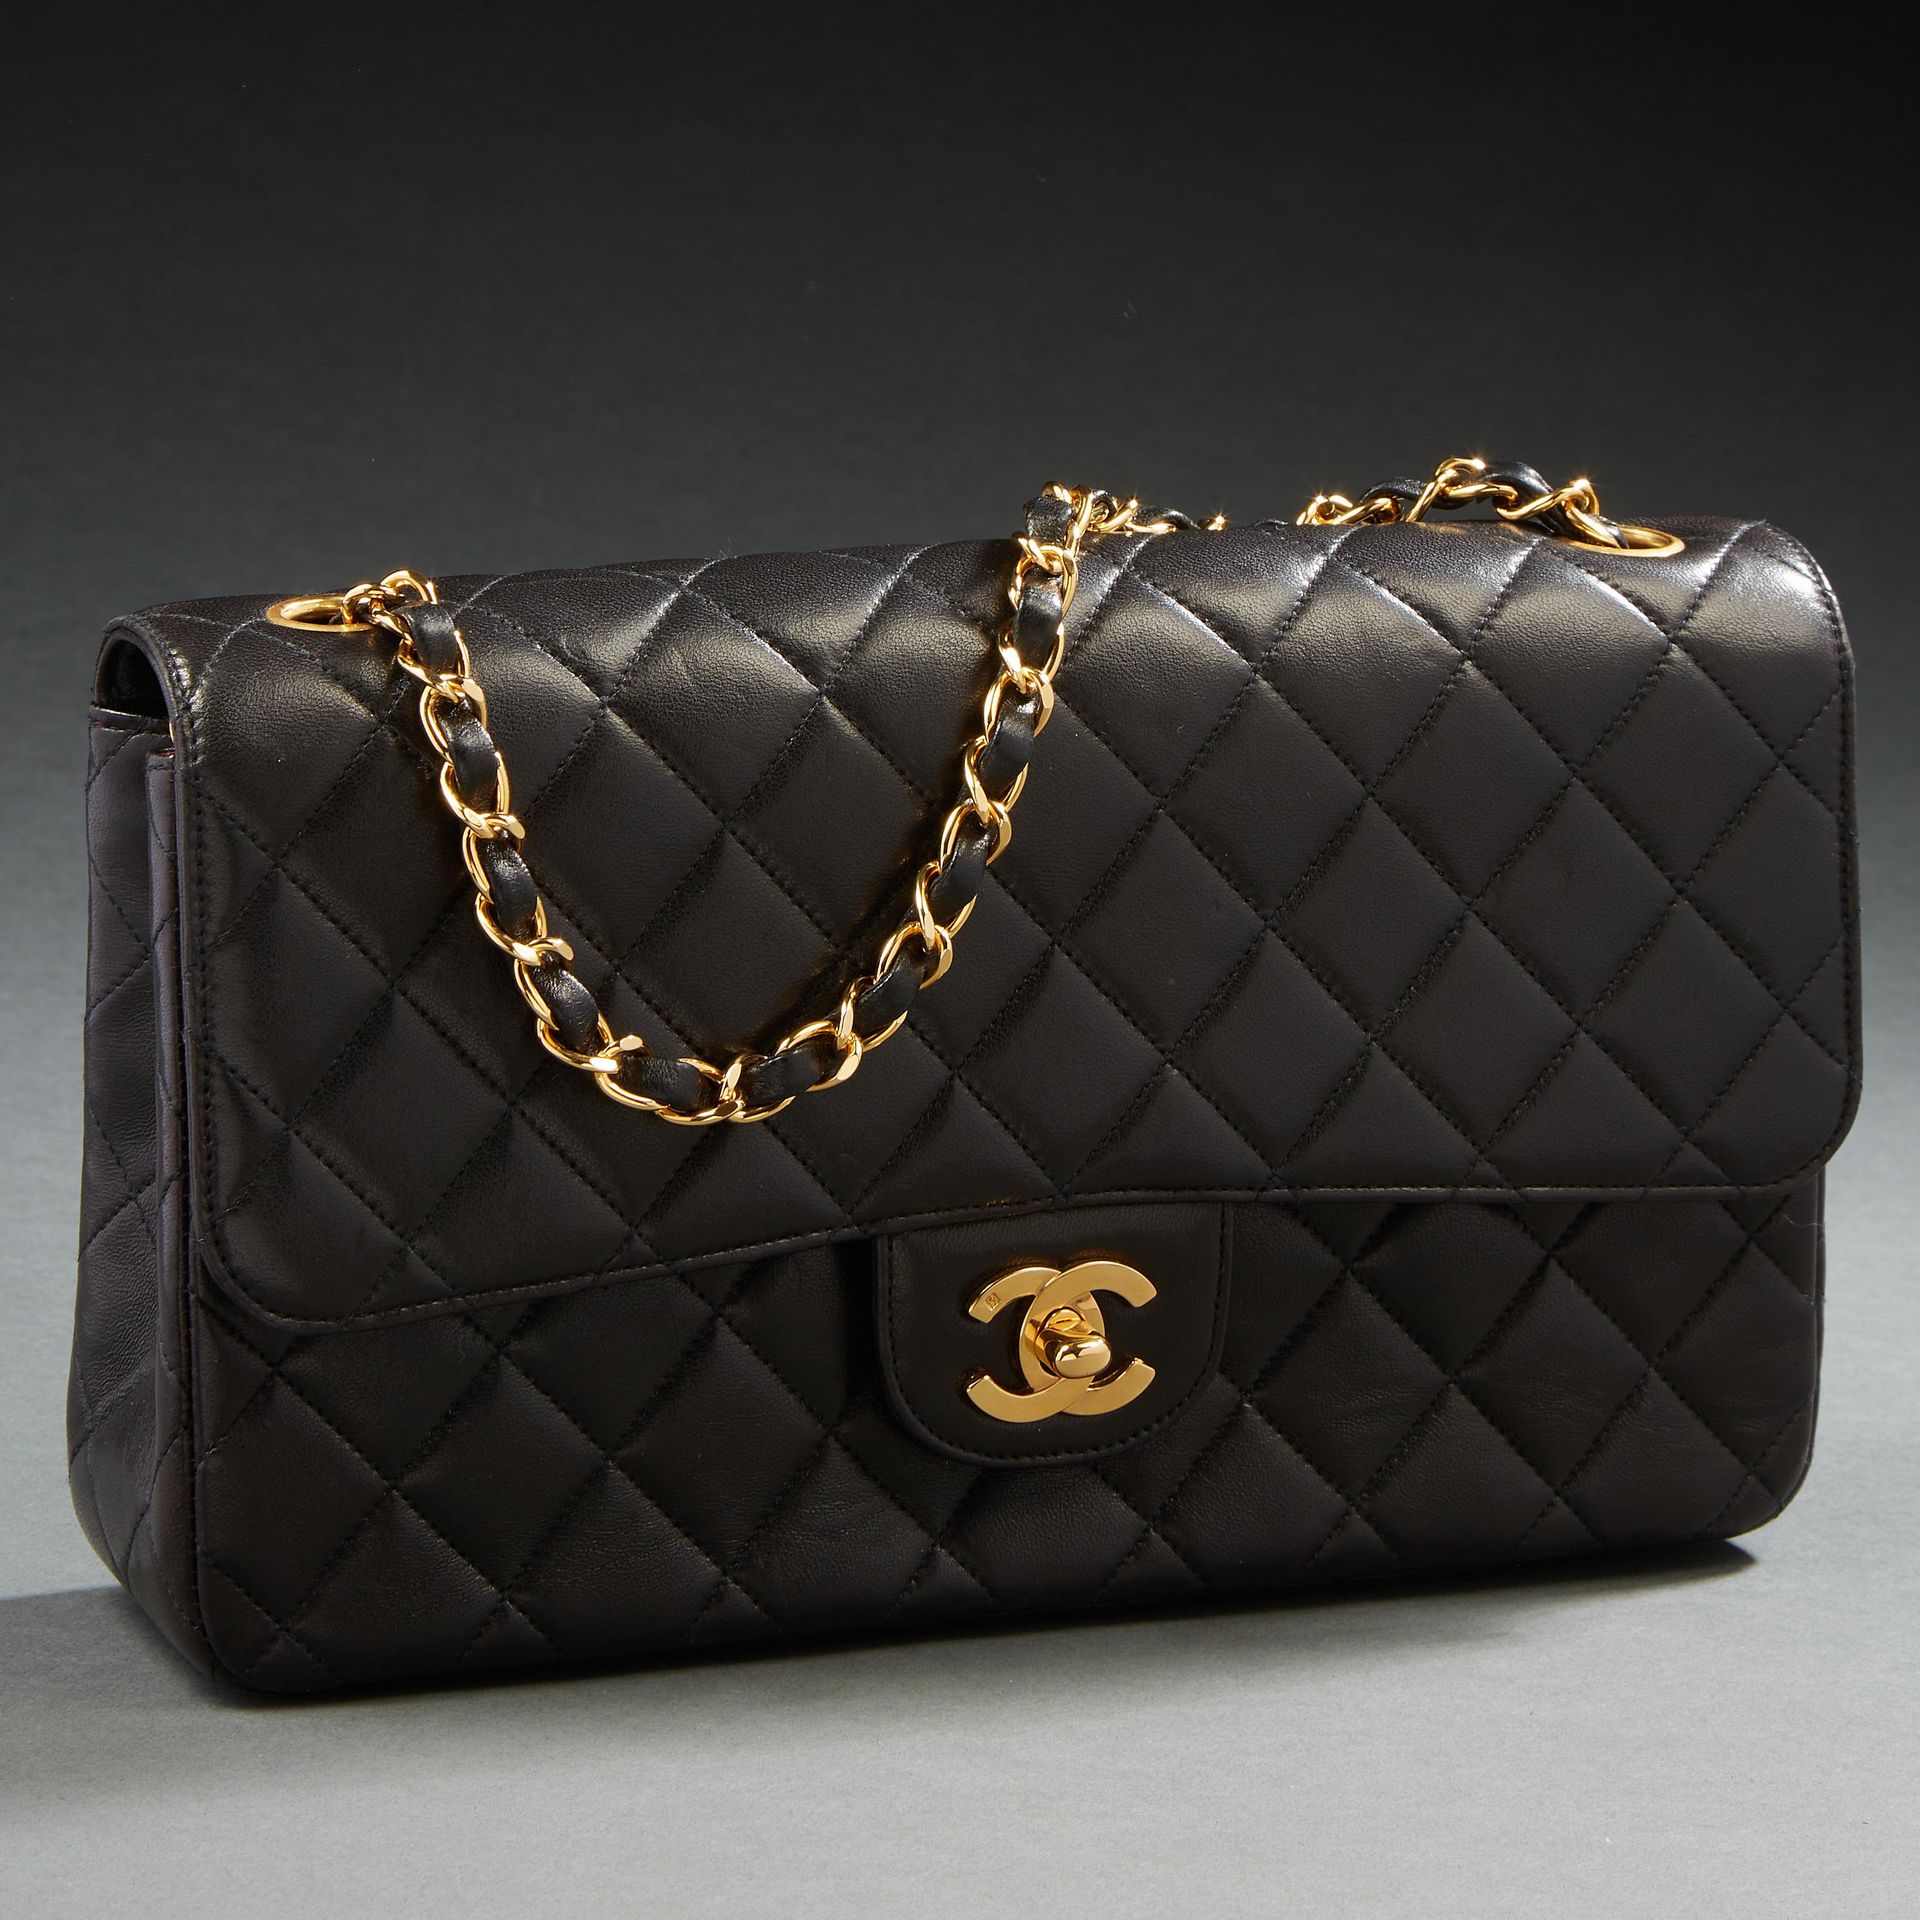 CHANEL Paris, made in France Classic single-flap bag in …